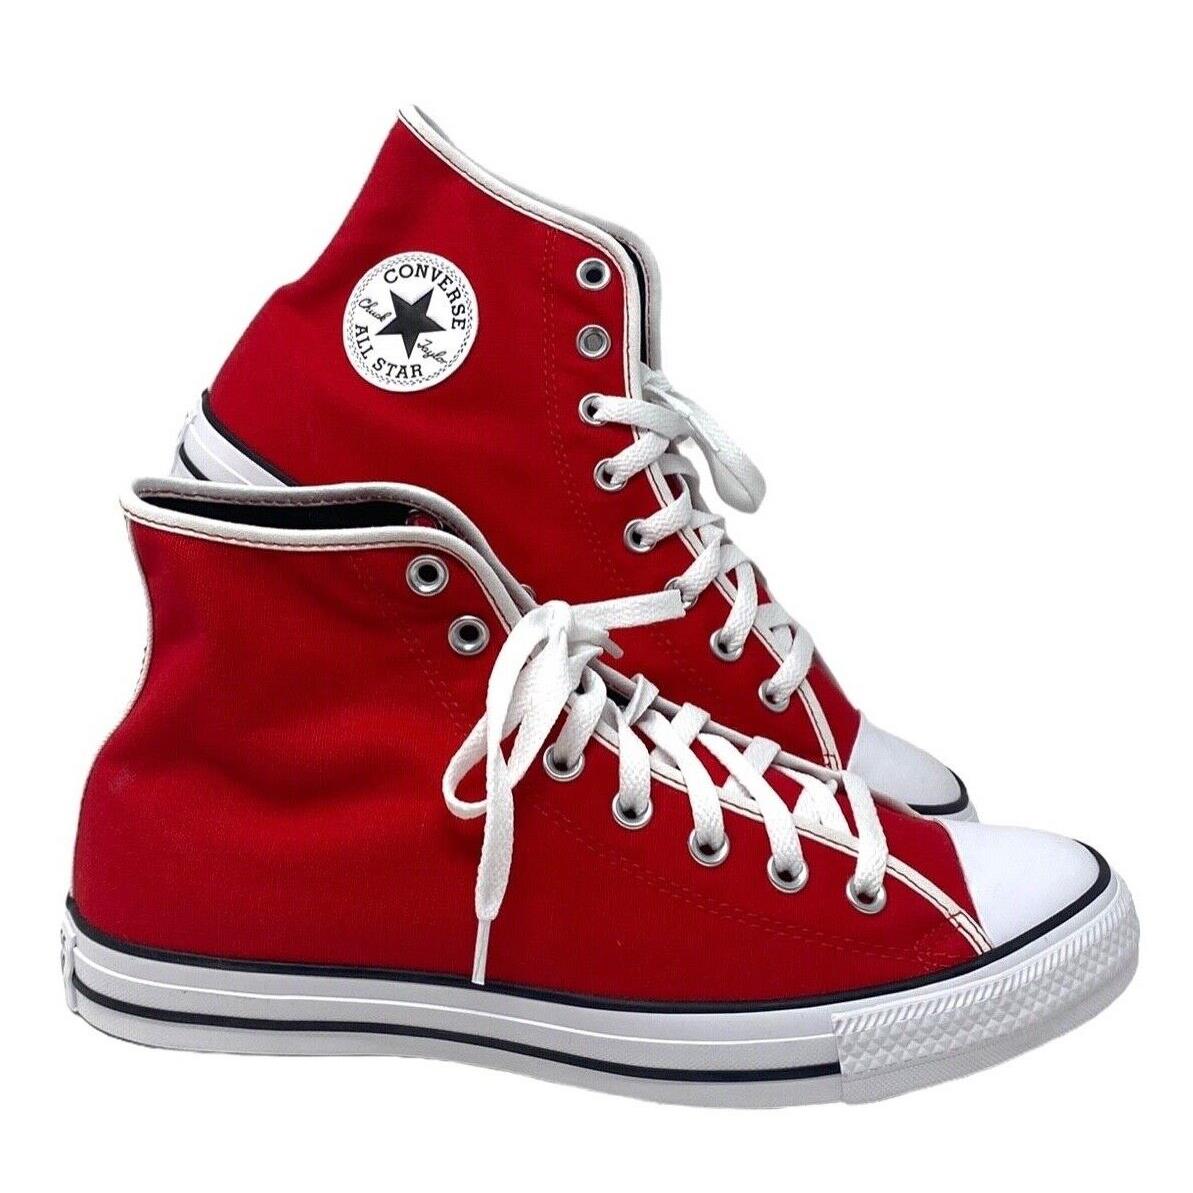 Converse Ctas Shoes High Skate Red White Canvas Men Sneakers Custom 152620C-WRW